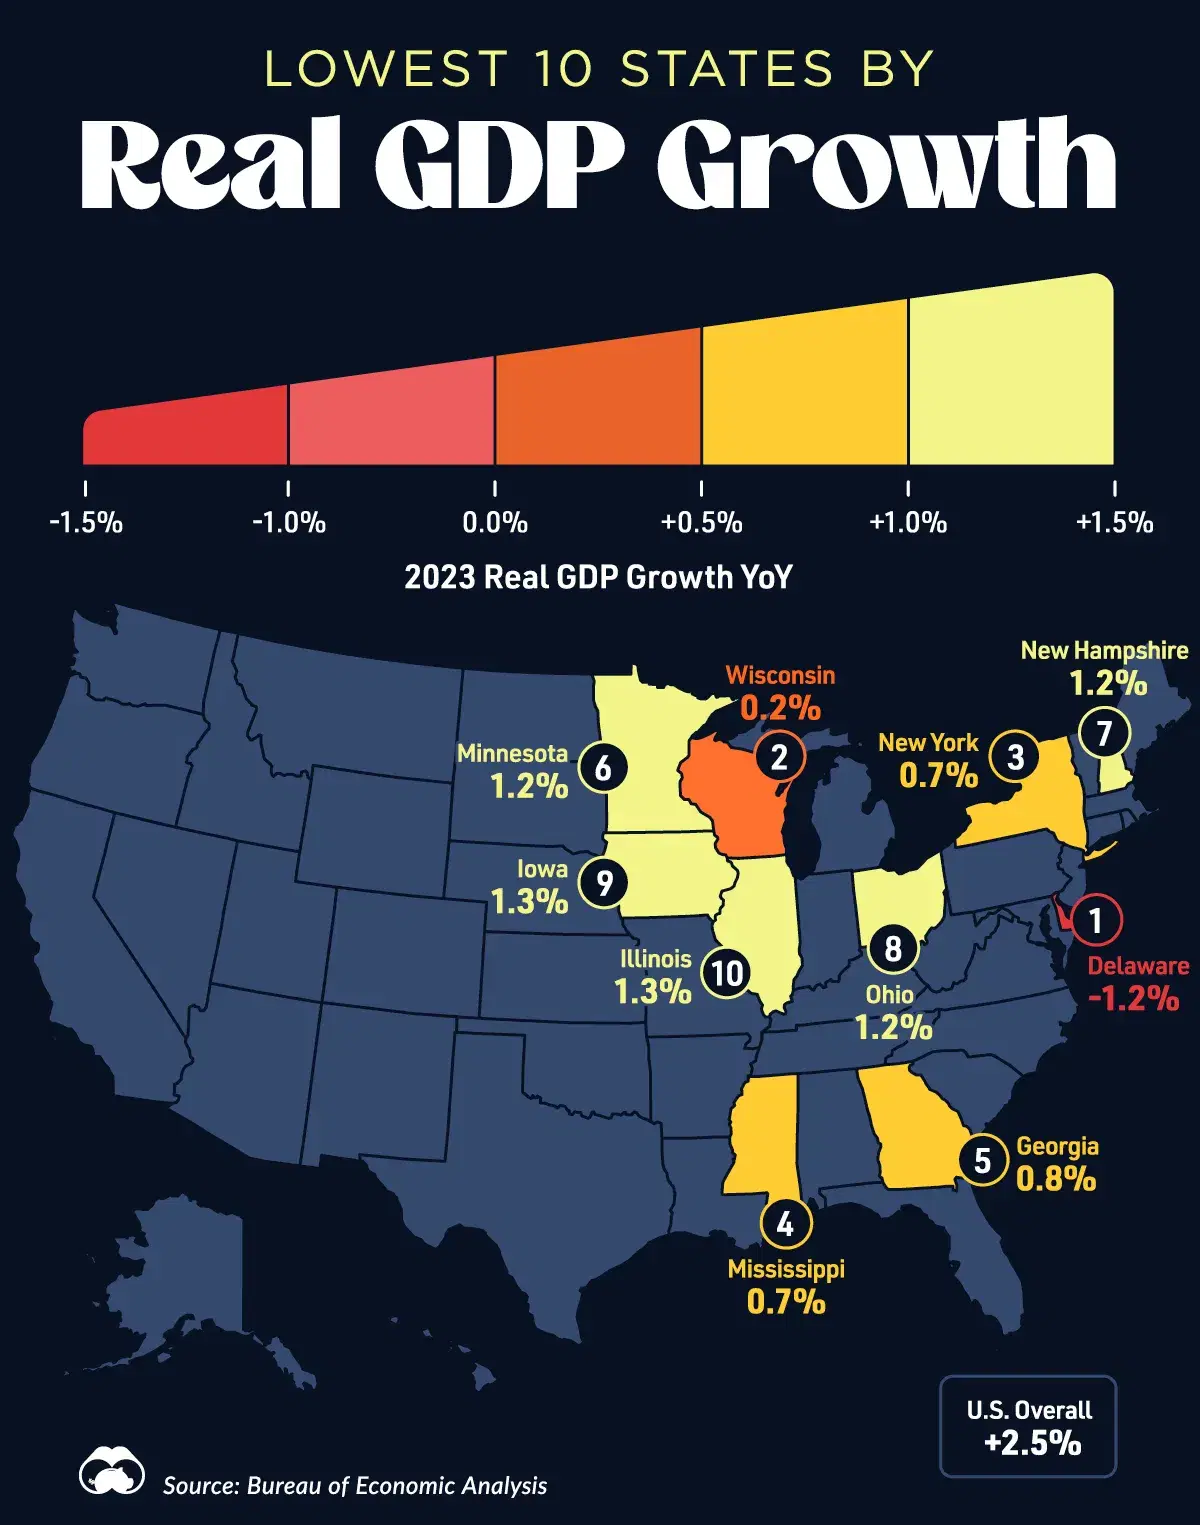 U.S. States with the Lowest Real GDP Growth in 2023